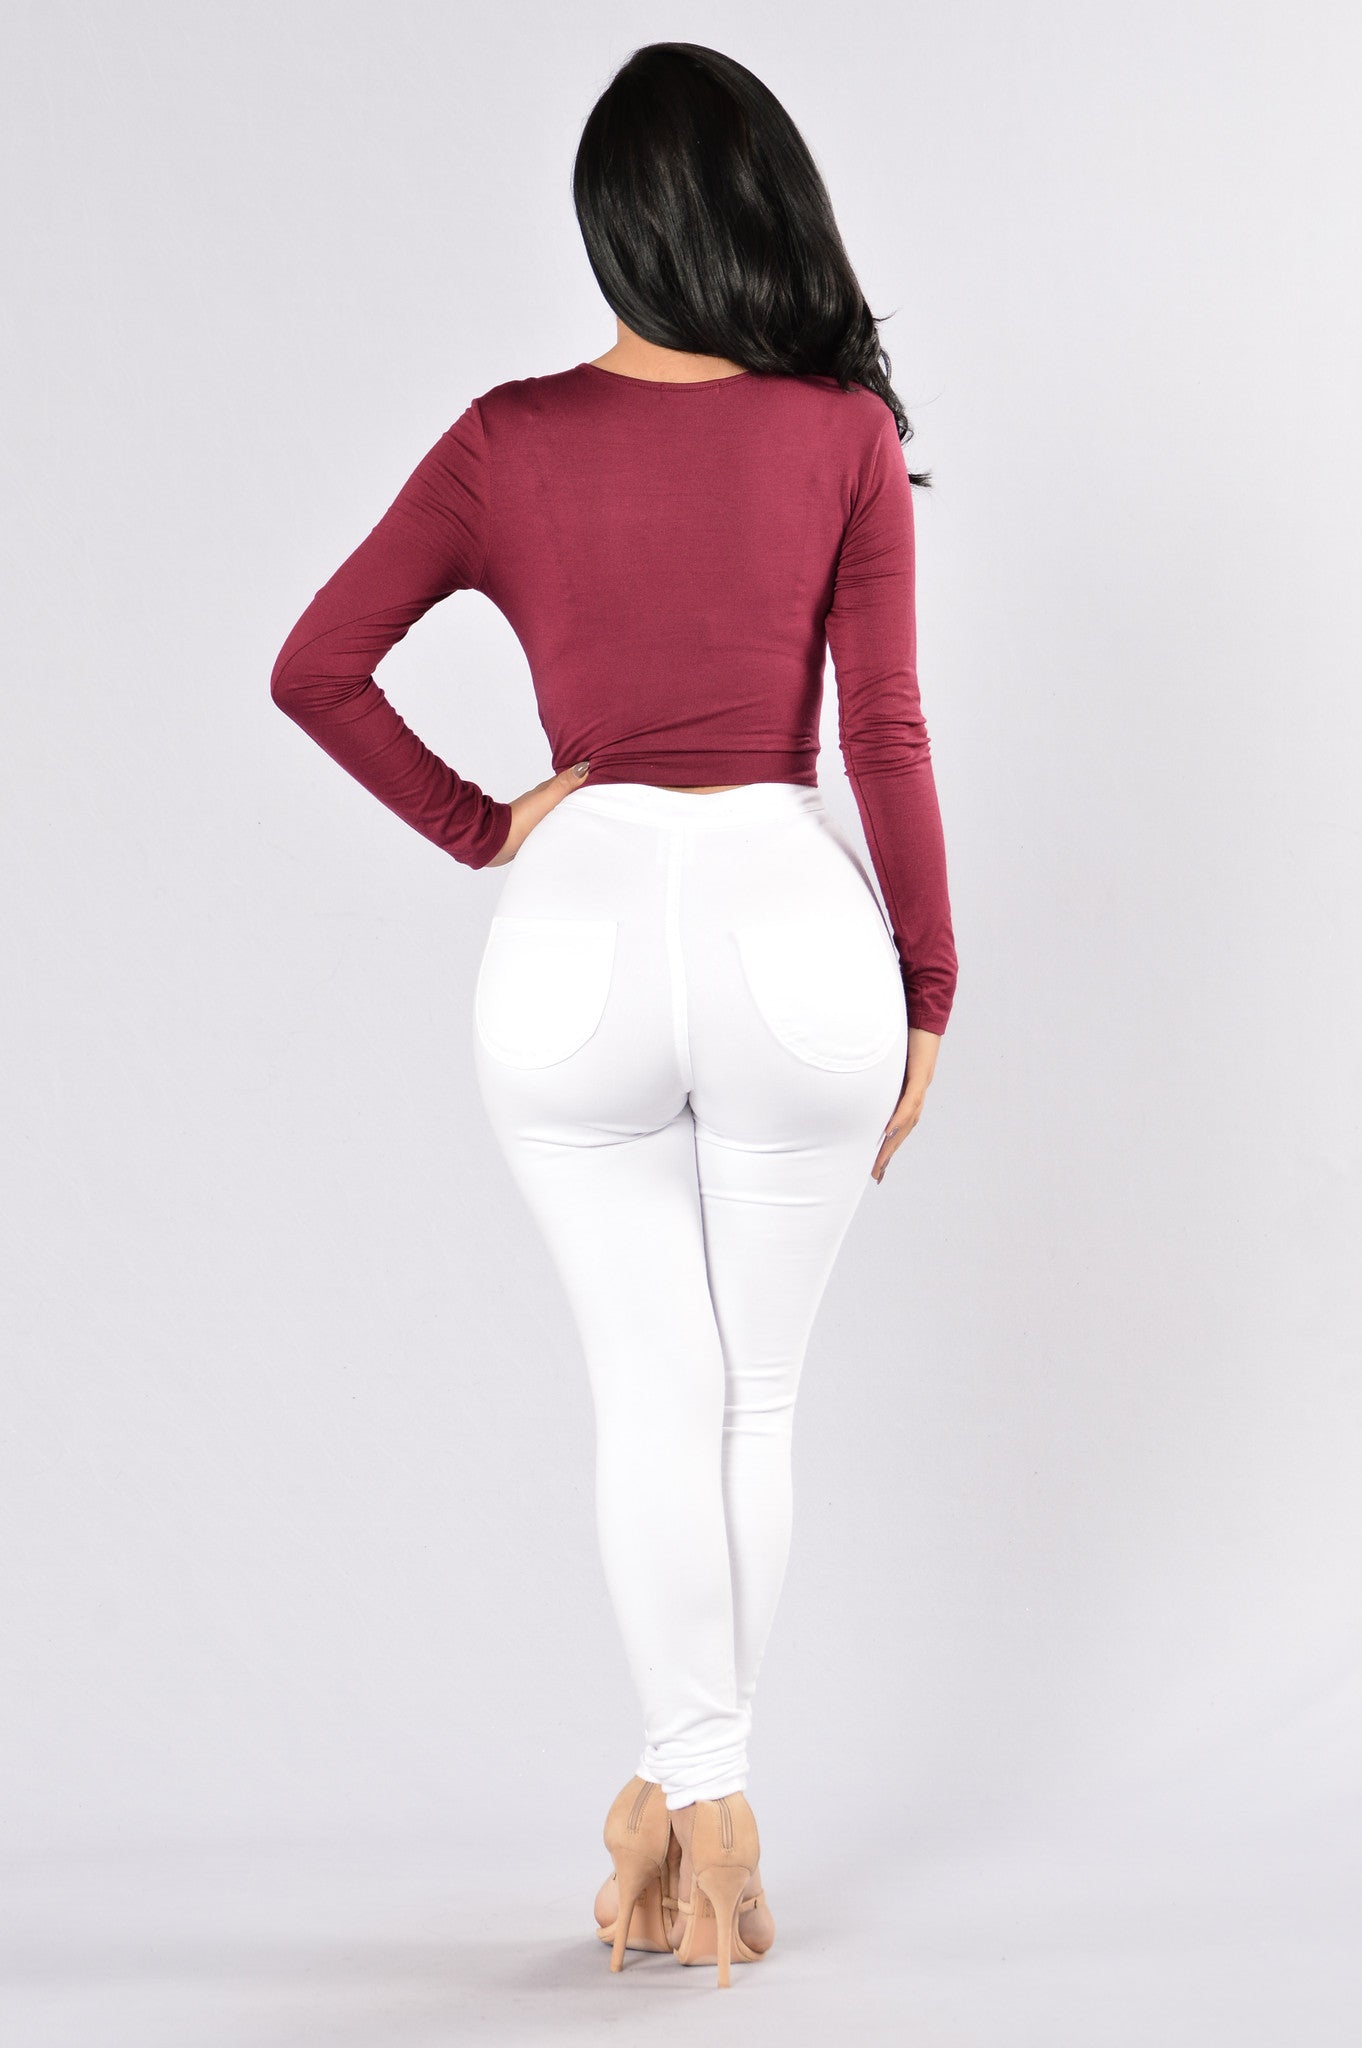 Knot Yours Top - Burgundy